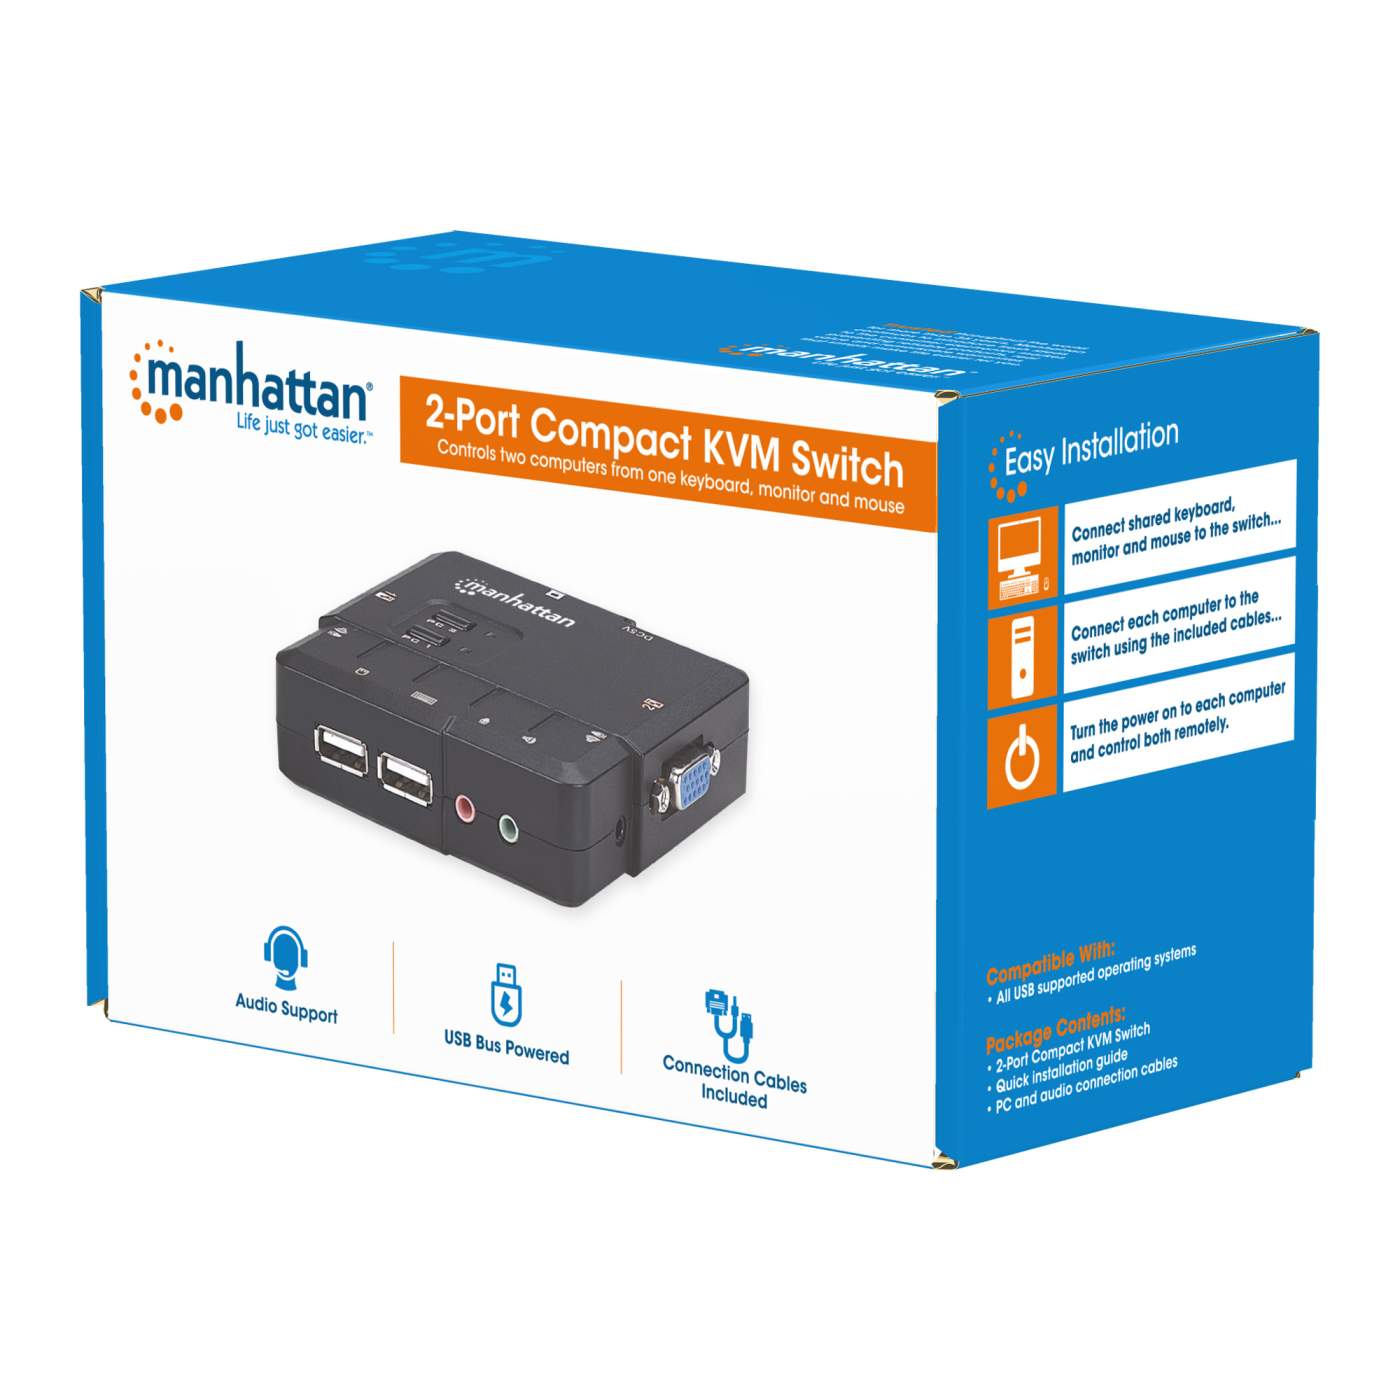 2-Port Compact KVM Switch Packaging Image 2